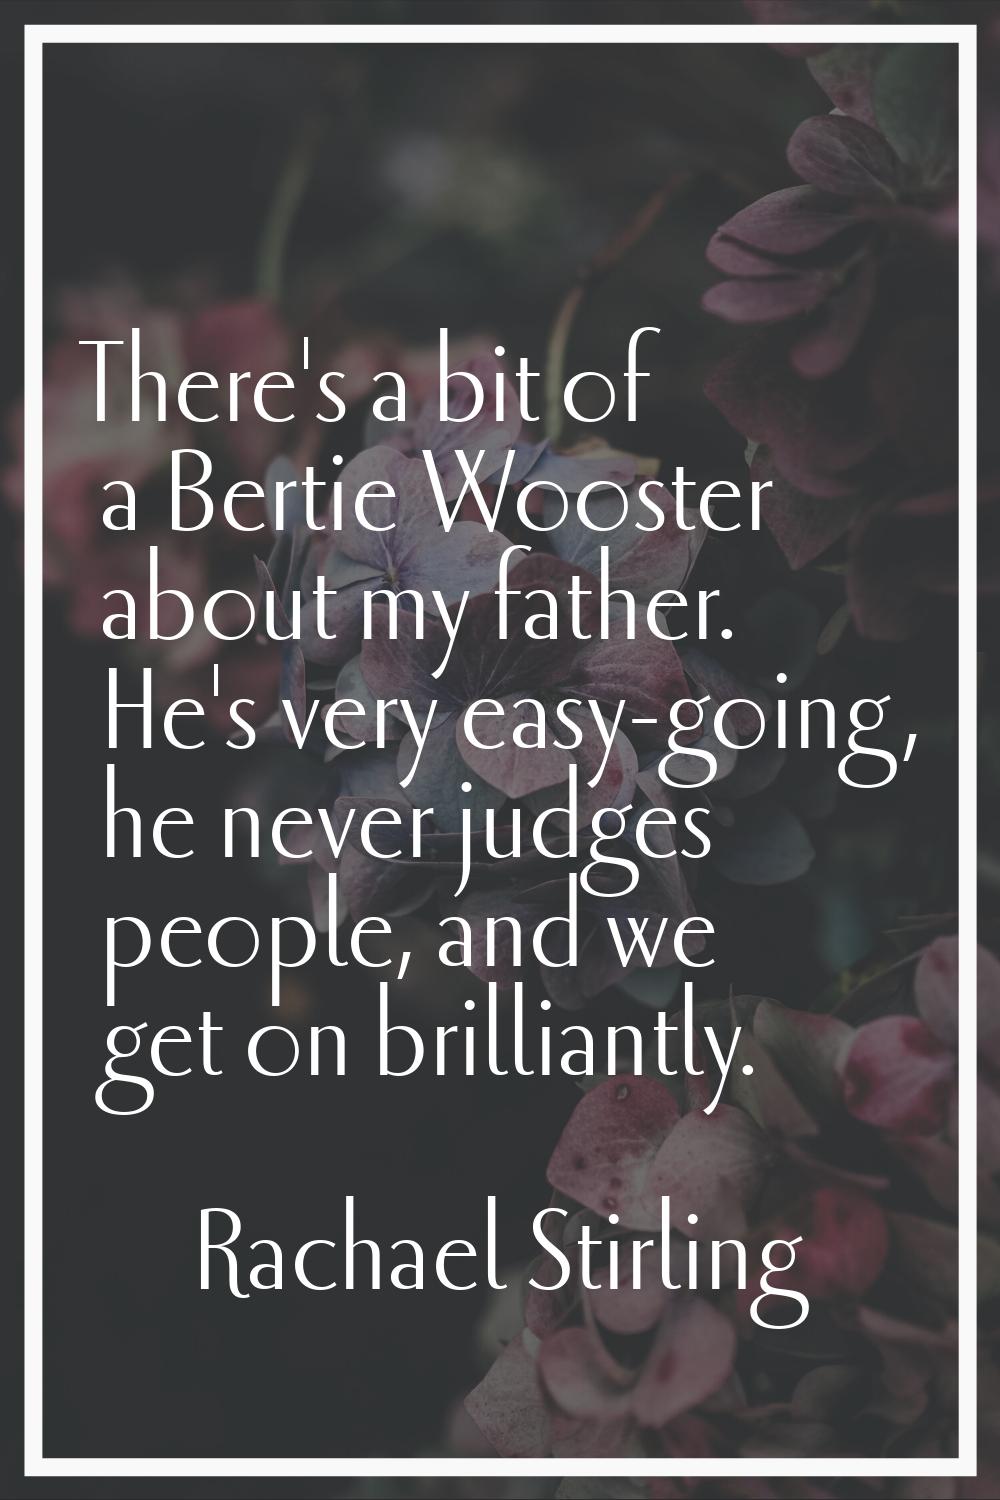 There's a bit of a Bertie Wooster about my father. He's very easy-going, he never judges people, an